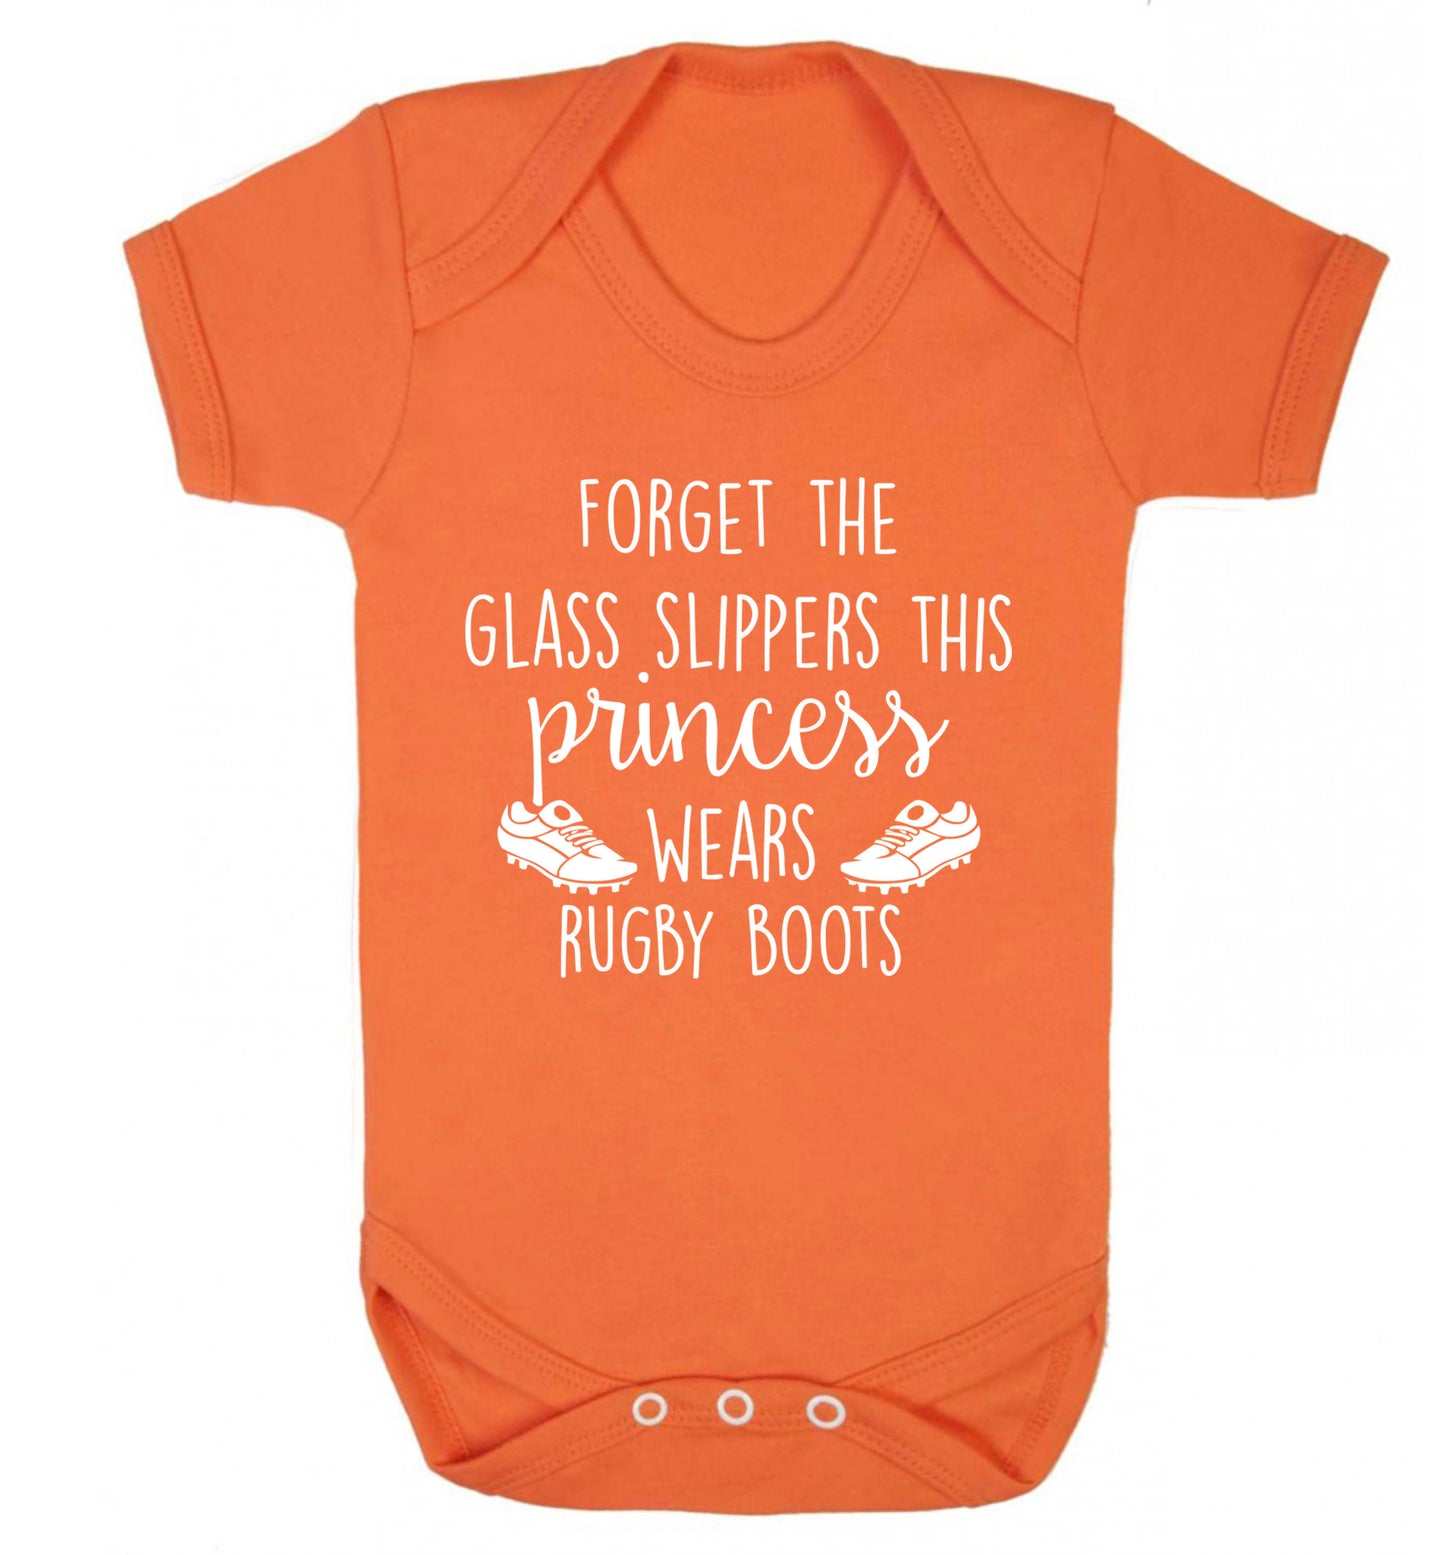 Forget the glass slippers this princess wears rugby boots Baby Vest orange 18-24 months